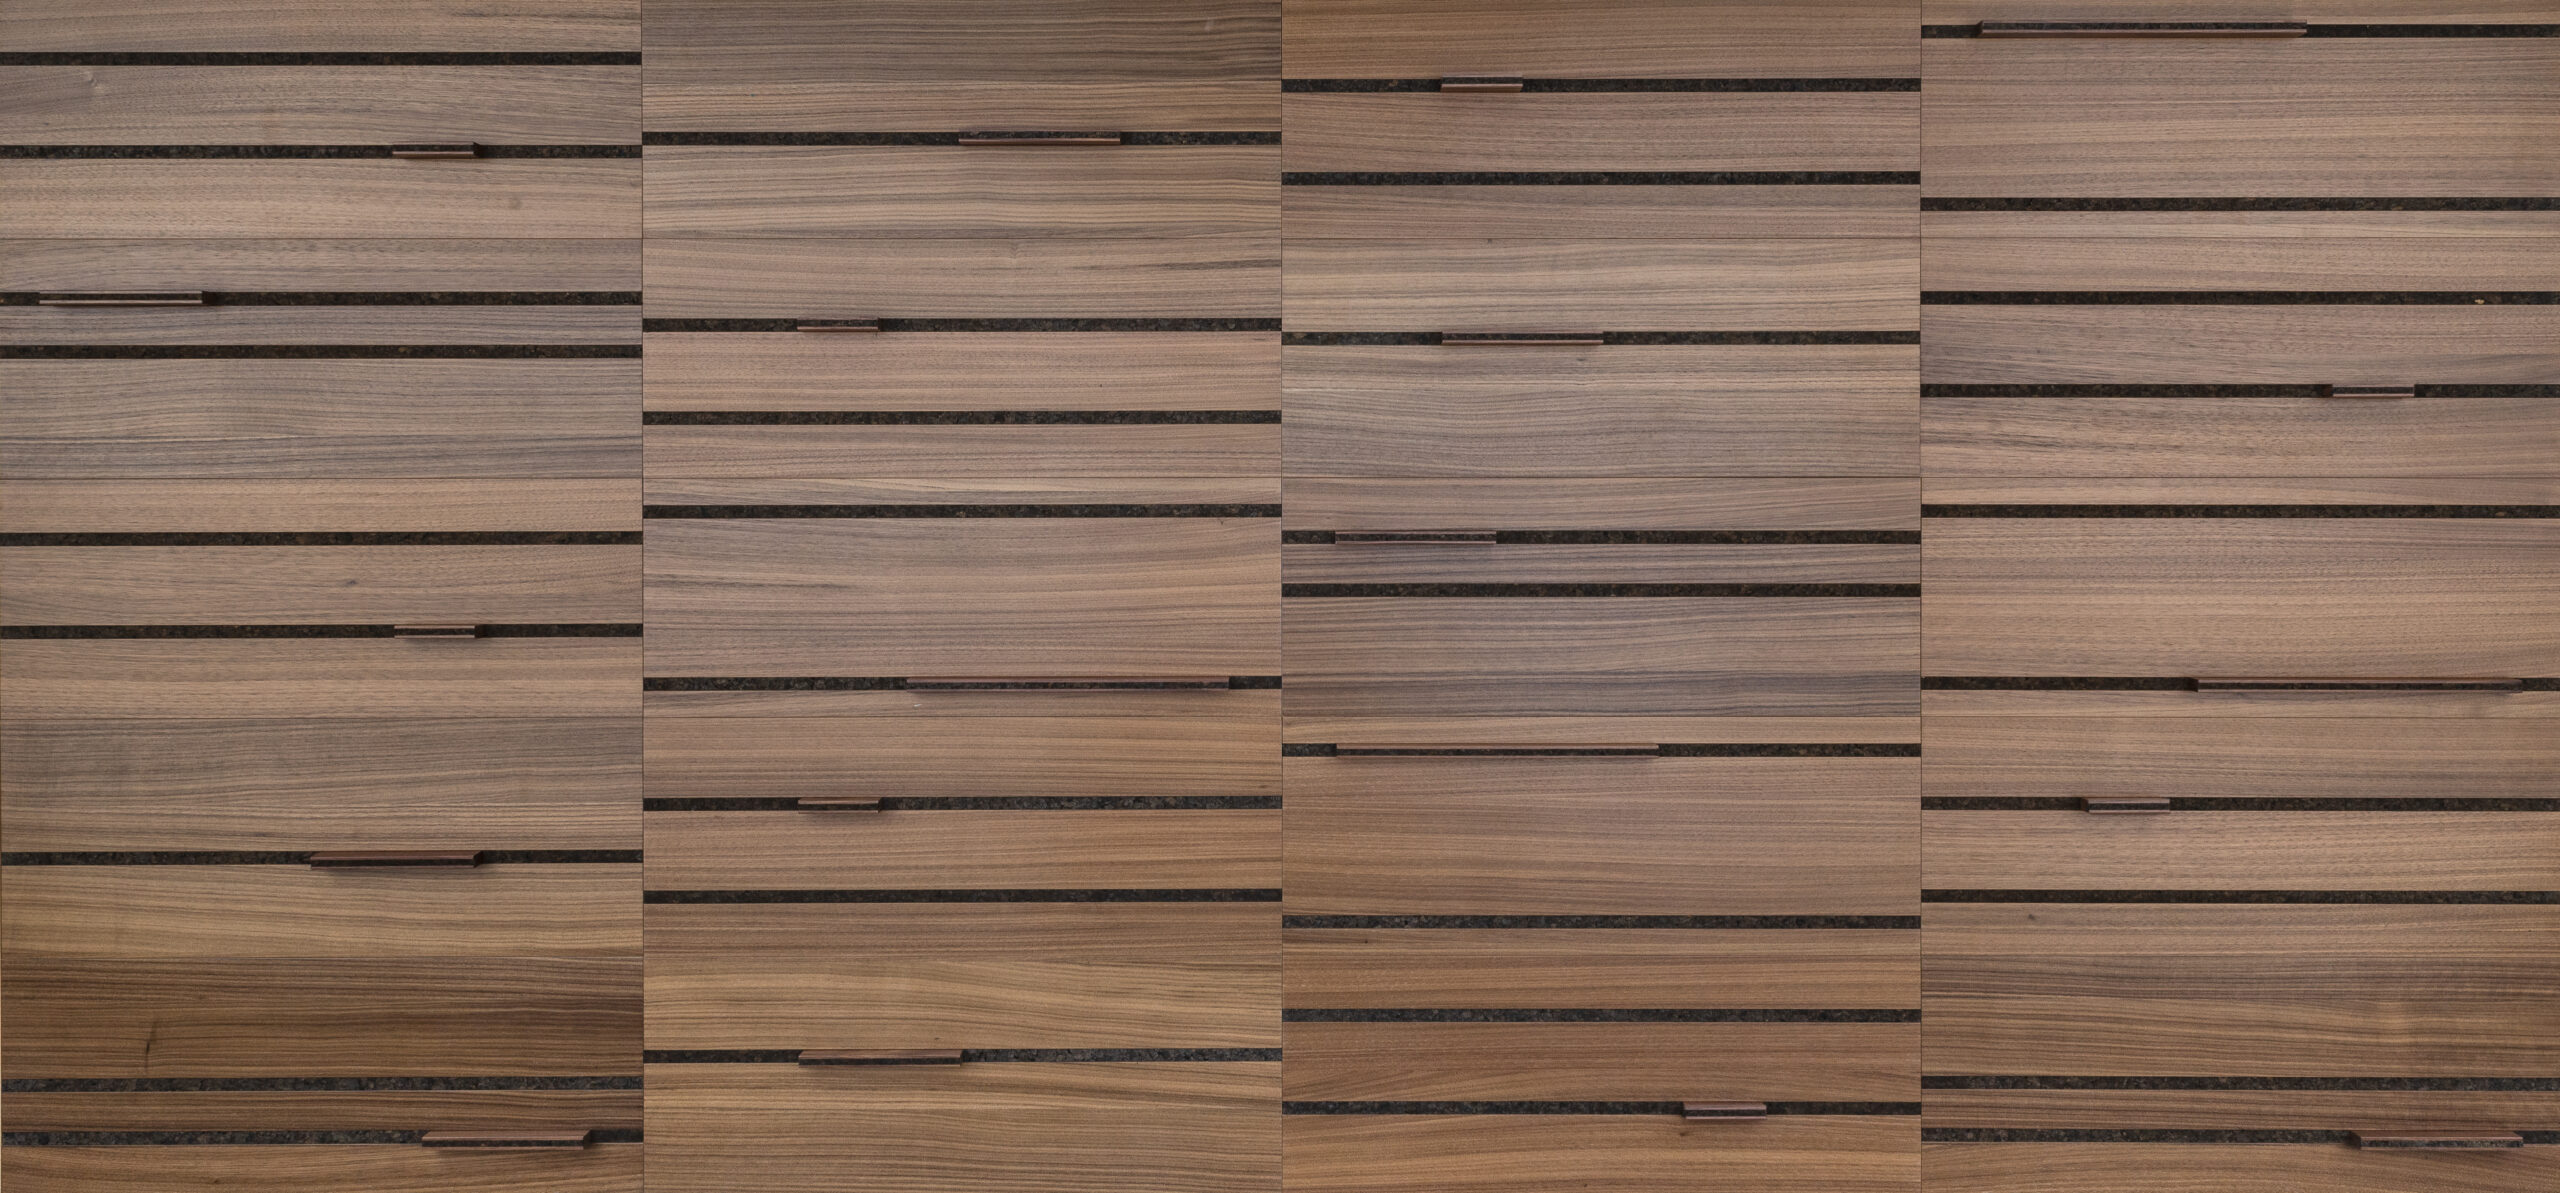 A closeup of a walnut wood wall covering with horizontal lines inlaid with a dark cork. Horizontal bars of various lengths are inset in the cork lines.